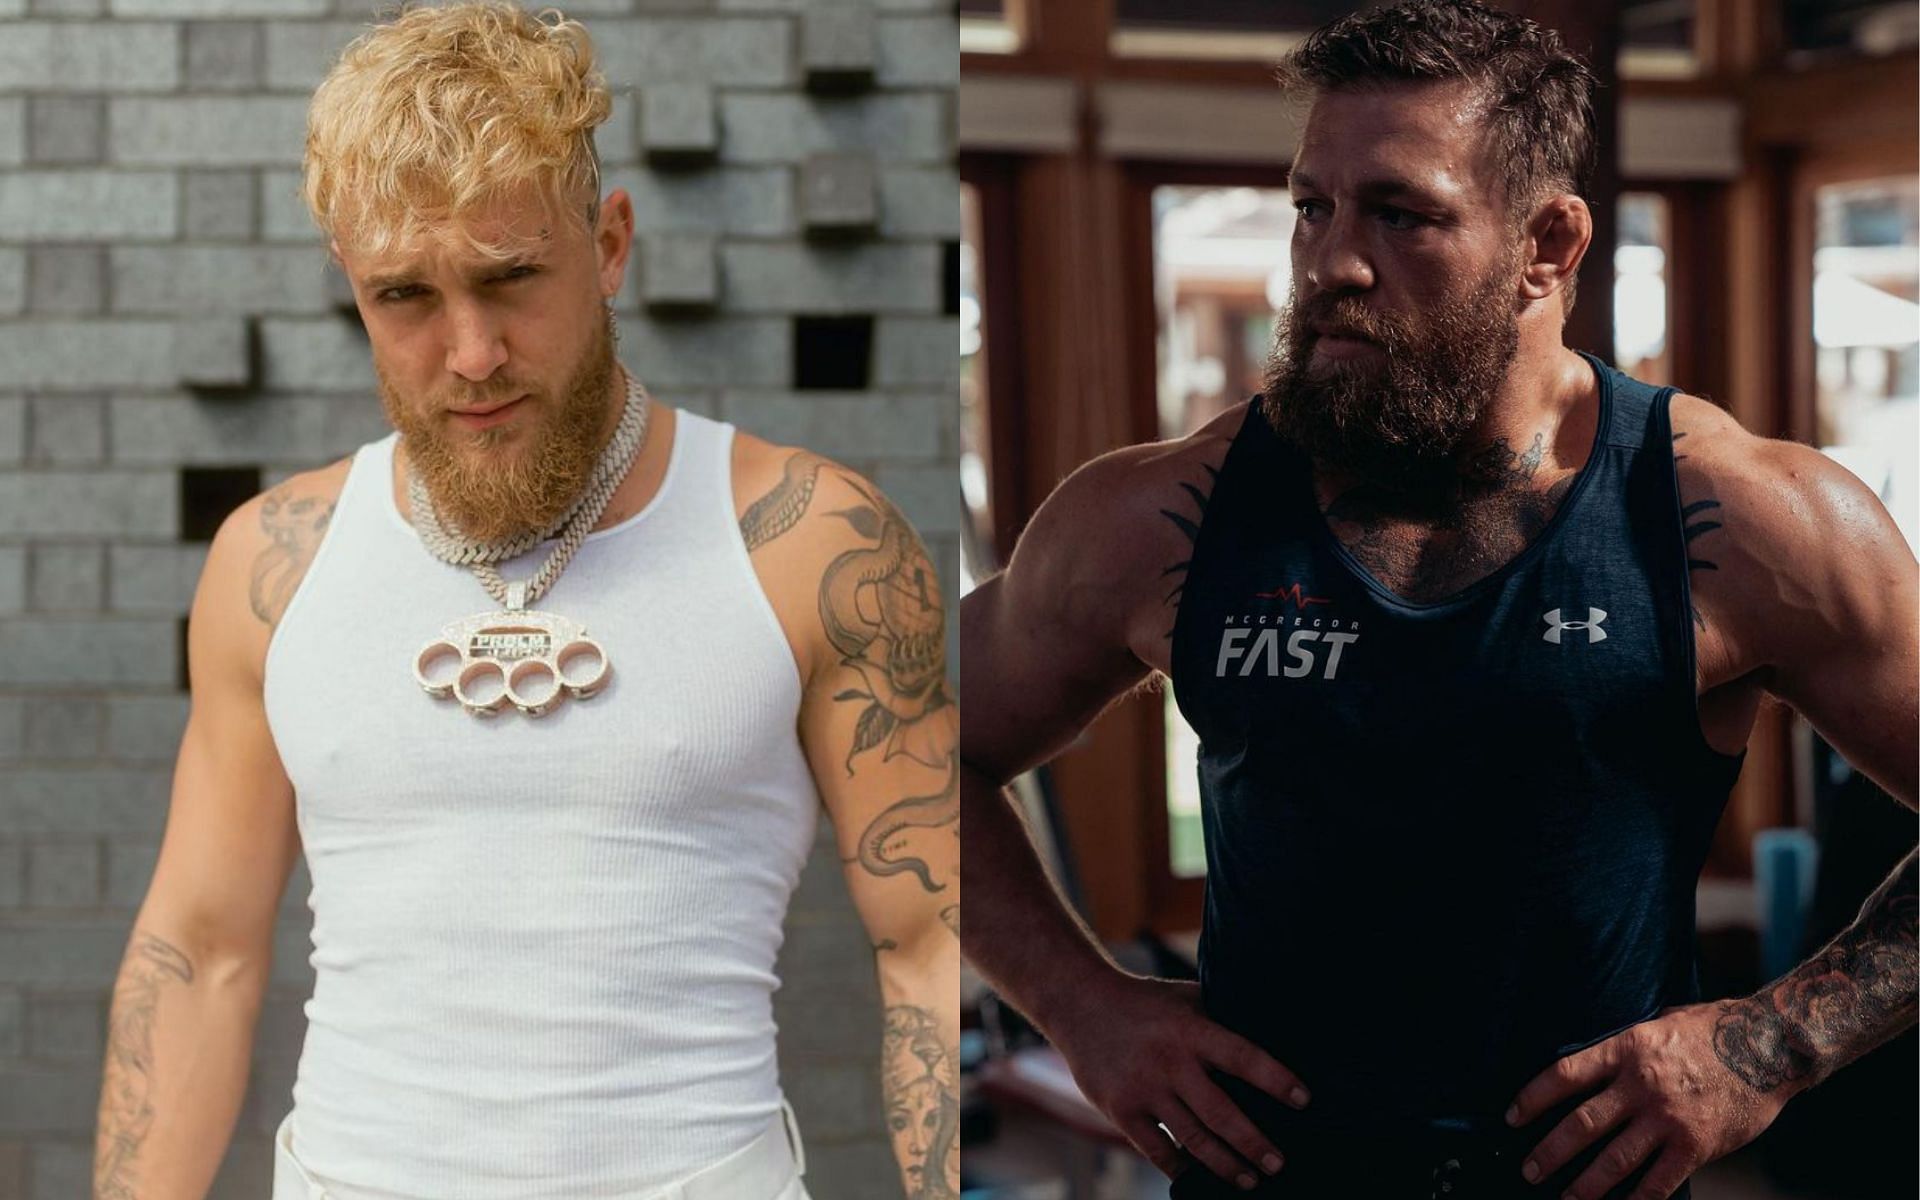 Jake Paul (Left), Conor McGregor (Right) [Image courtesy: @jakepaul and @thenotoriousmma on Instagram]